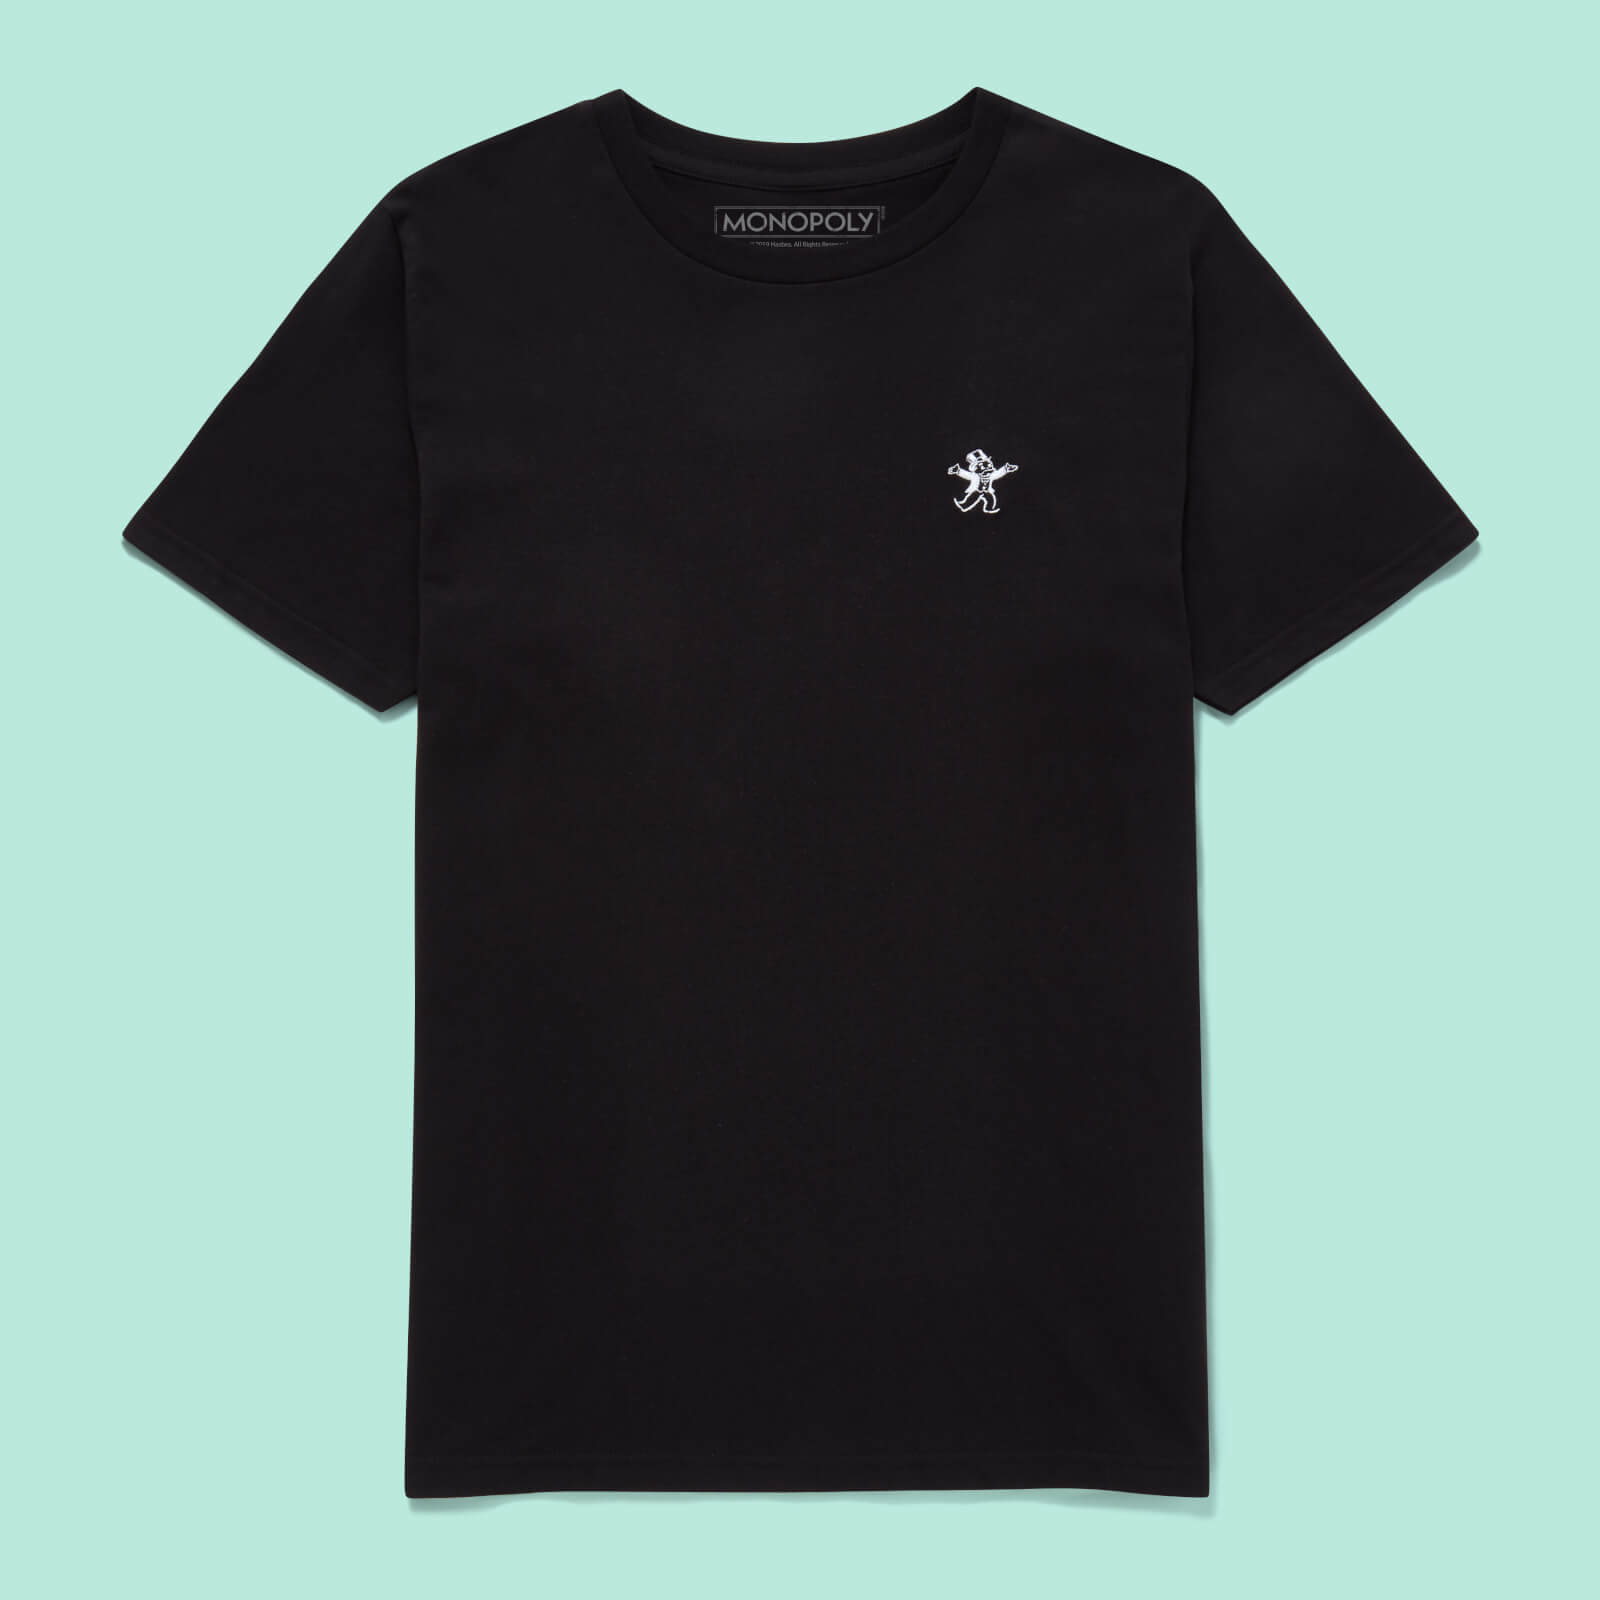 Monopoly Mr Monopoly Embroidered T-Shirt - Black - XS von Monopoly